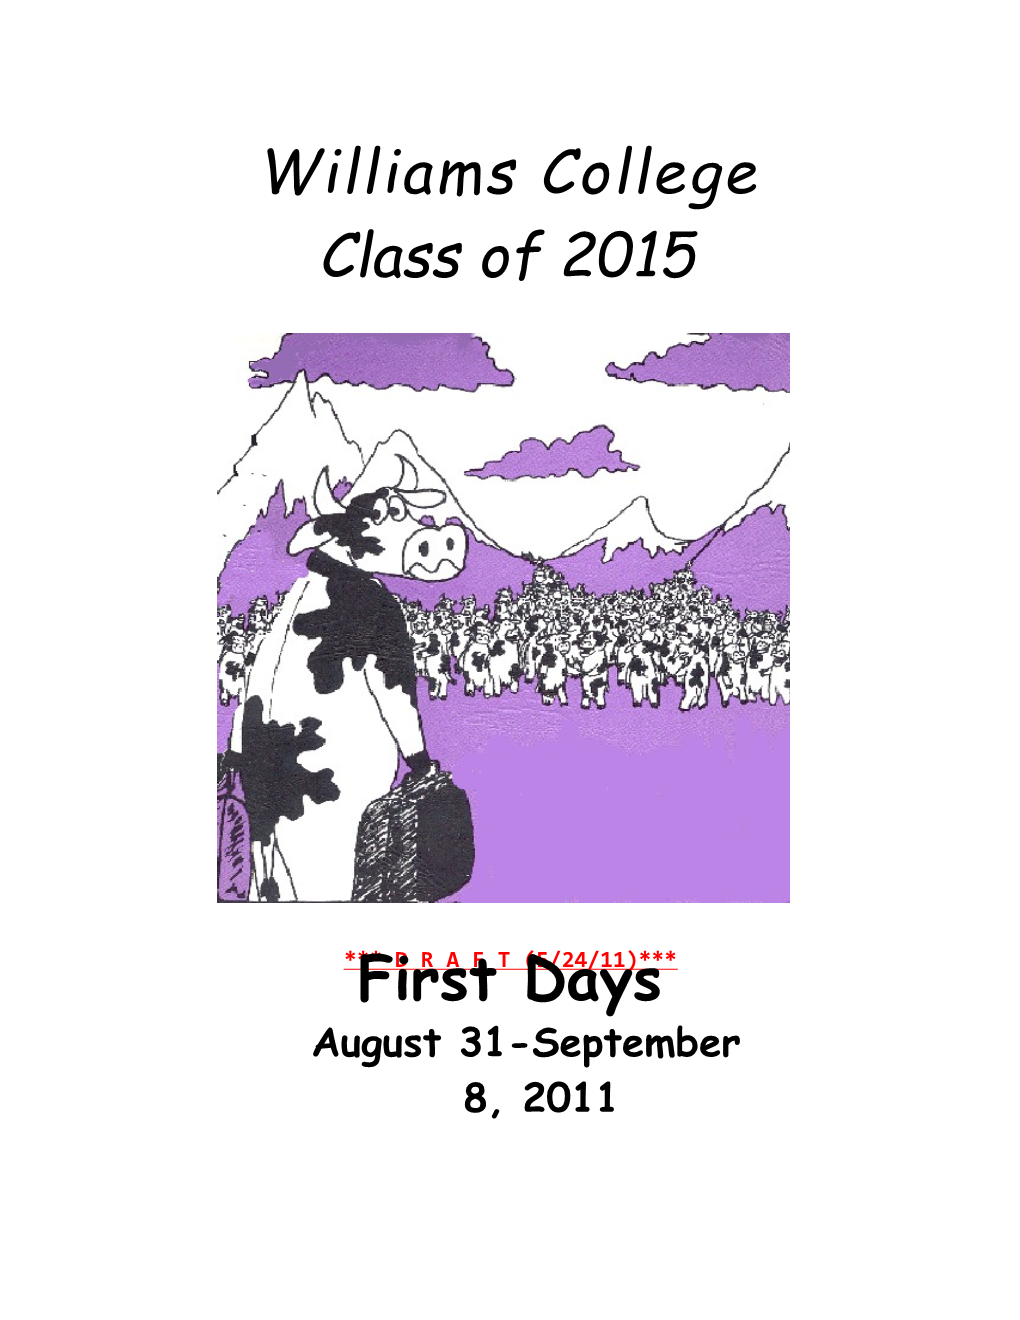 Williams Welcomes the Class of 15!